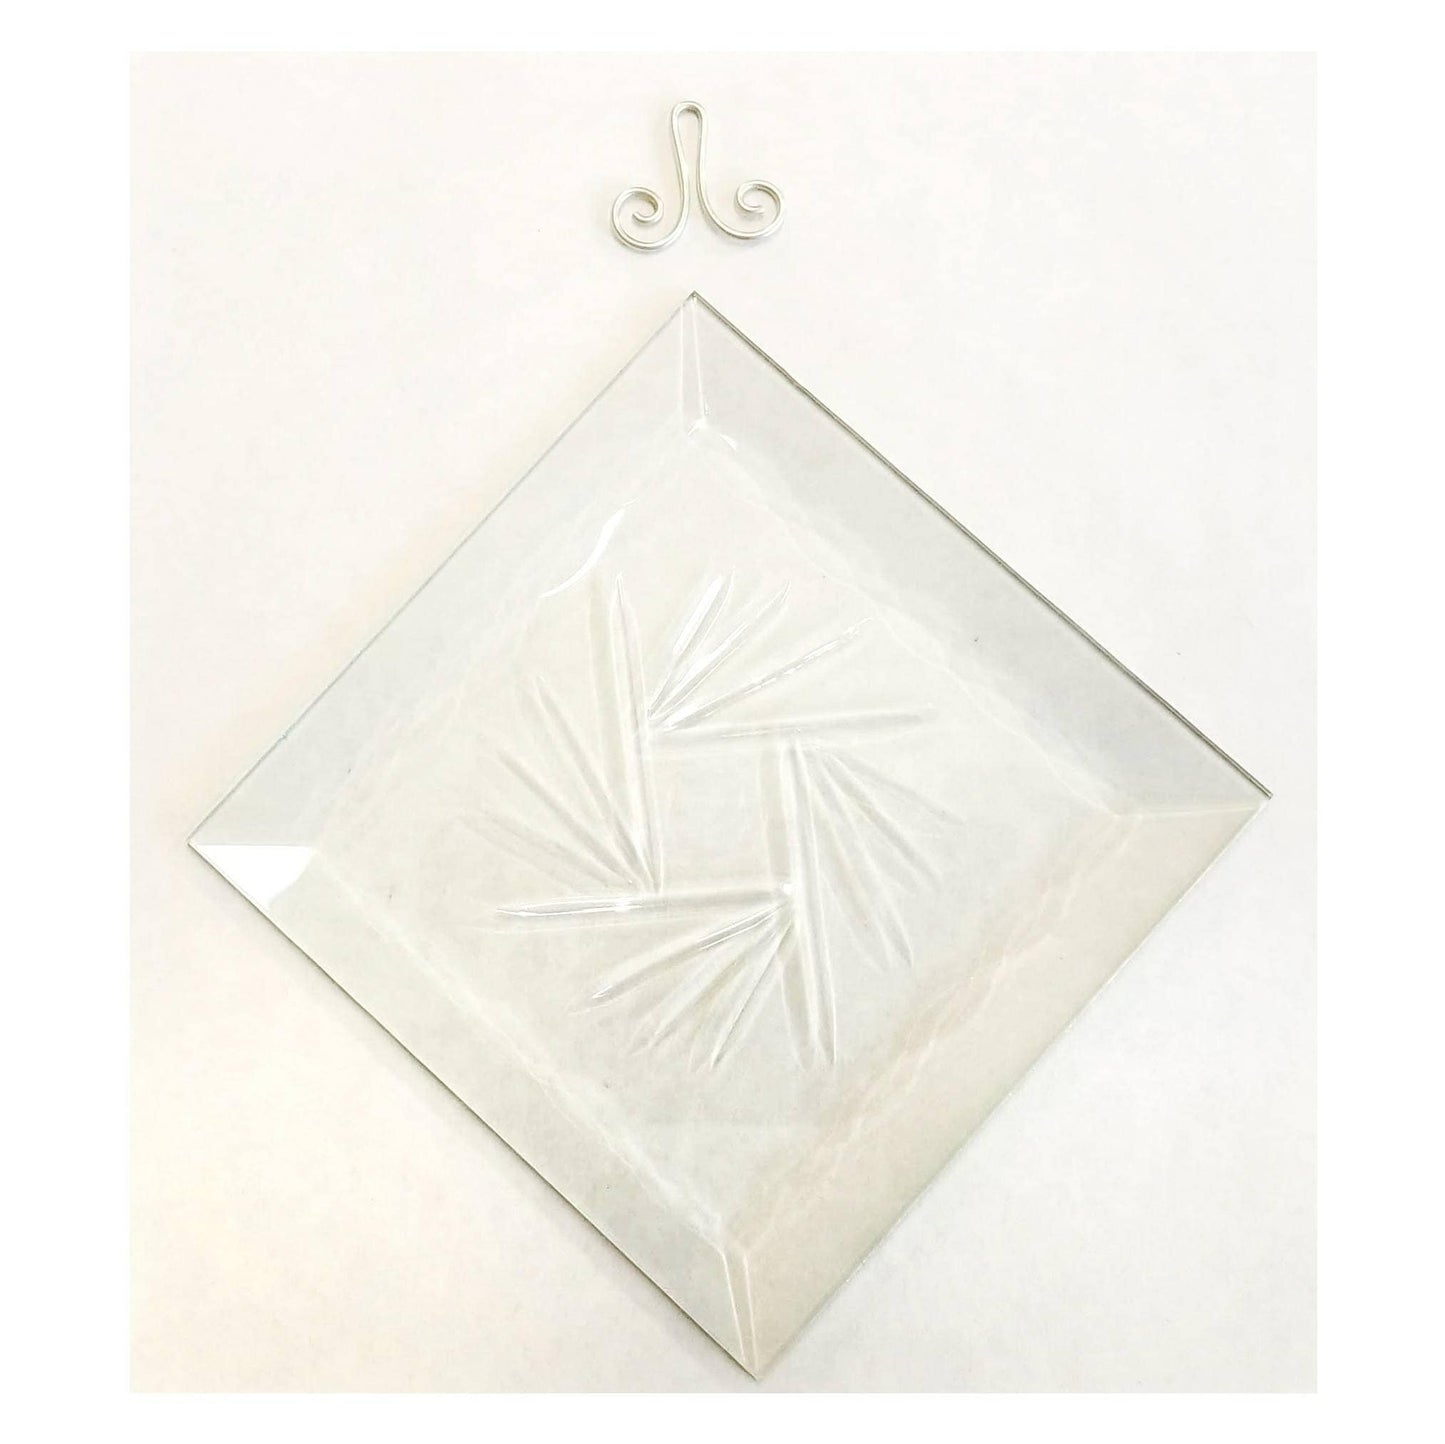 Bevel, Engraved Pinwheel. Clear Stained Glass. 4"x 4'' Square. Starburst prism edges. Diy Glass Art, Craft Hobby. Easy to foil or U & H came